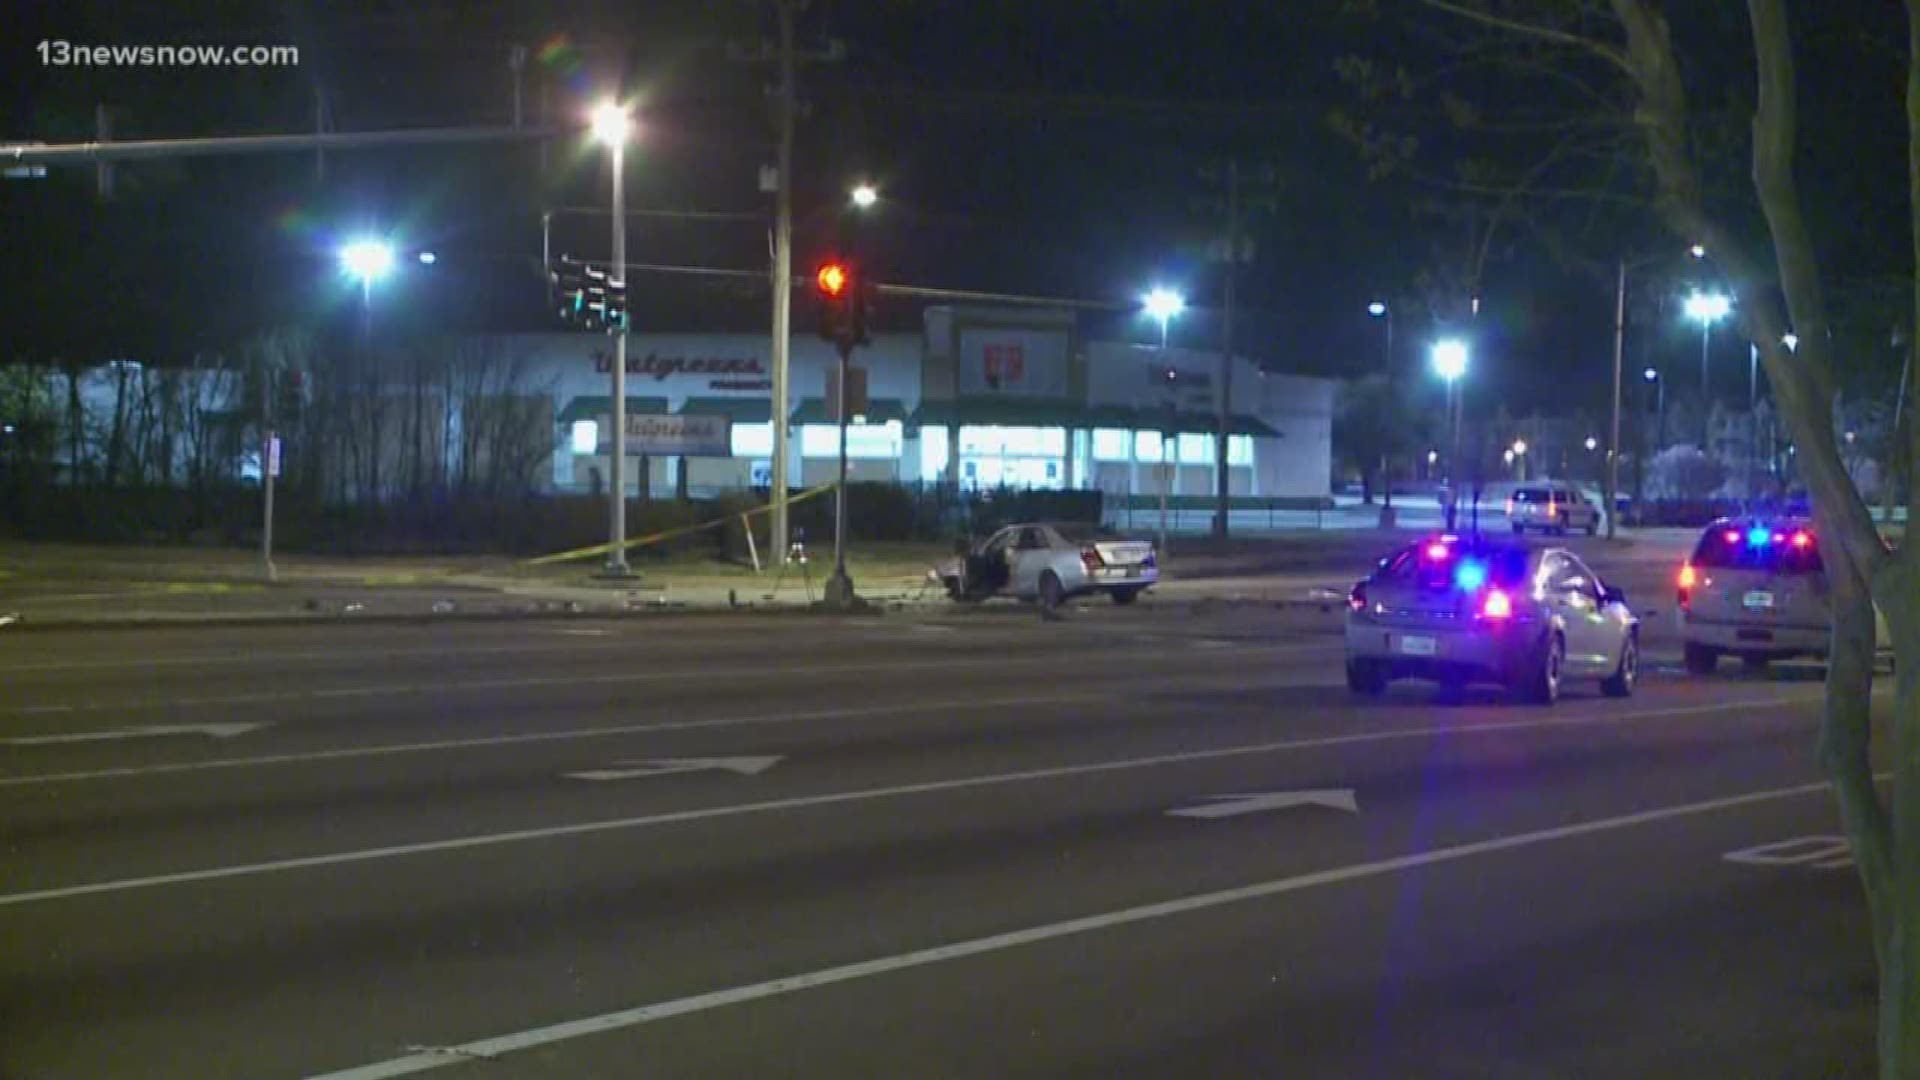 A driver and a pedestrian were killed in a crash on S. Military Highway.